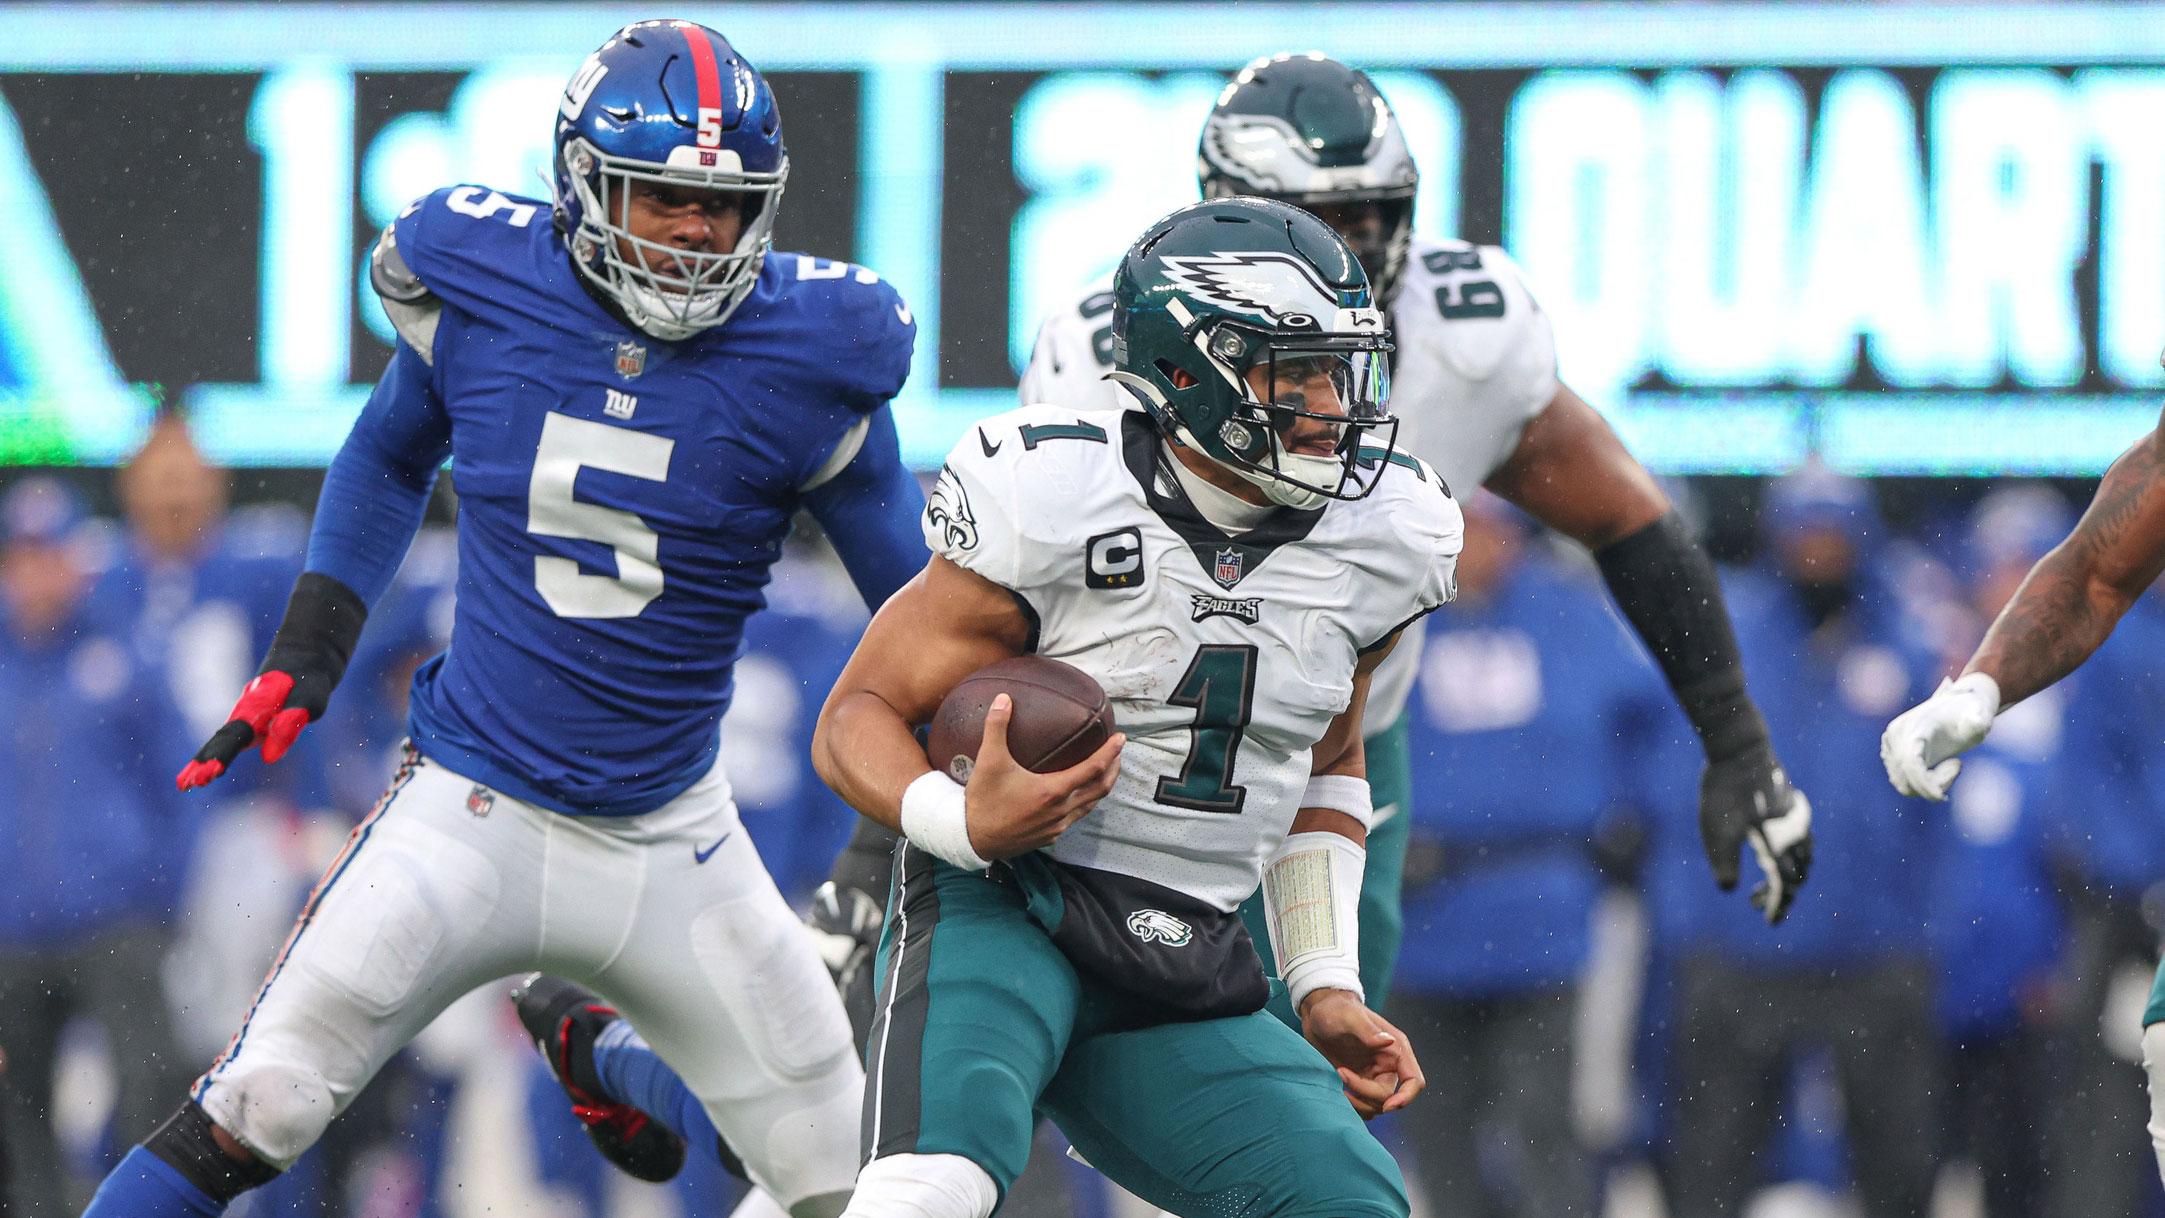 Dec 11, 2022; East Rutherford, New Jersey, USA; Philadelphia Eagles quarterback Jalen Hurts (1) scrambles for yards in front of New York Giants defensive end Kayvon Thibodeaux (5) during the first half at MetLife Stadium. / Vincent Carchietta-USA TODAY Sports